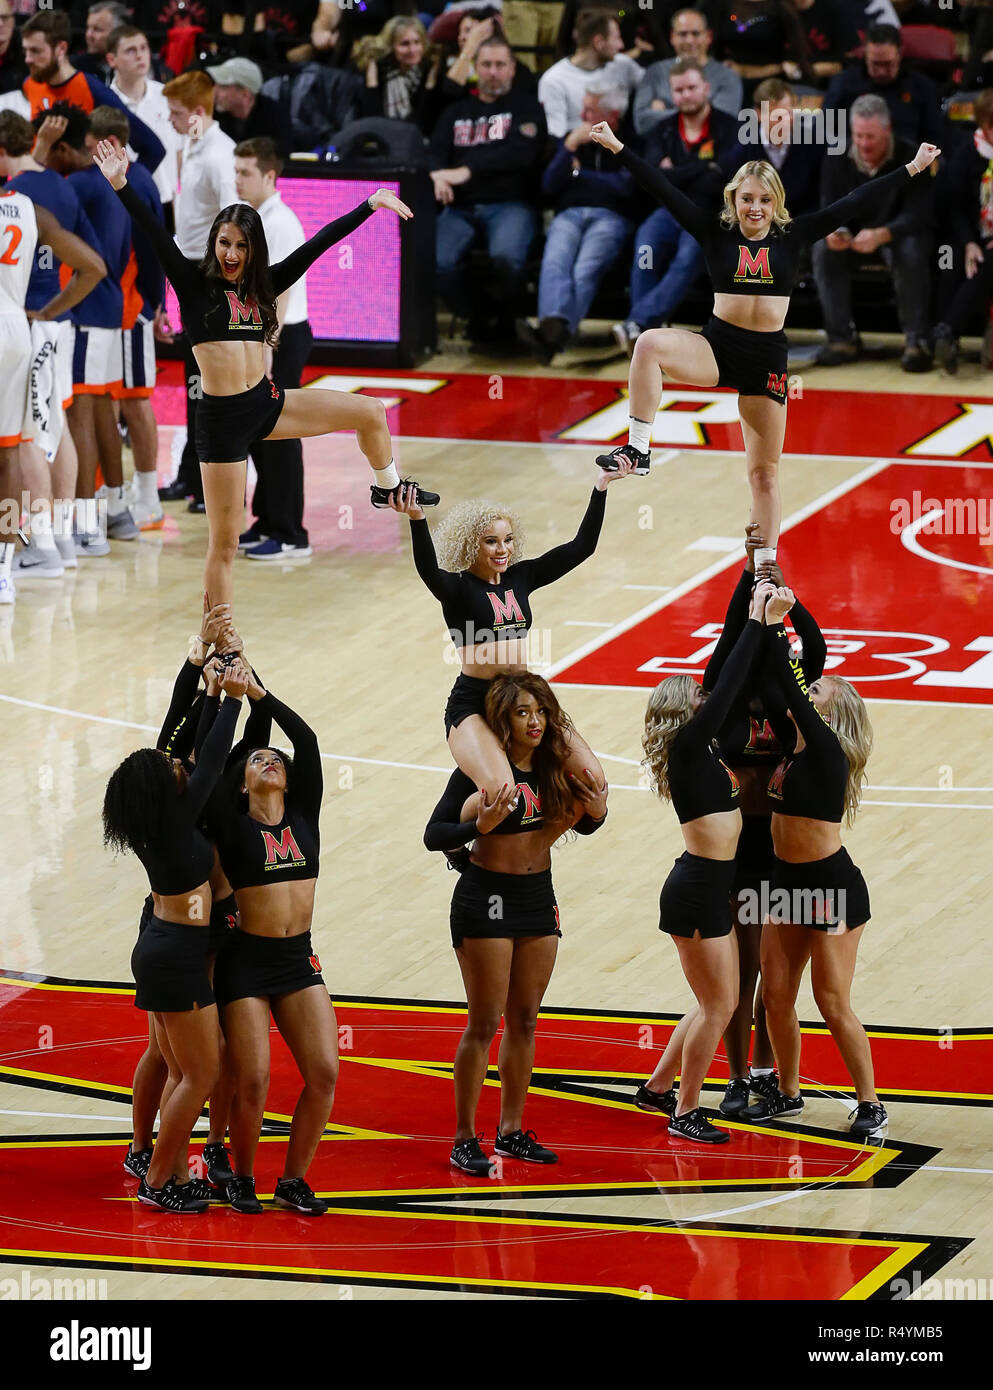 College Park, MD, USA. 28th Nov, 2018. Maryland Terrapins cheerleaders perform during a NCAA Men's Basketball game between the University of Maryland Terrapins and the University of Virginia Cavaliers at the Xfinity Center in College Park, MD. Justin Cooper/CSM/Alamy Live News Stock Photo